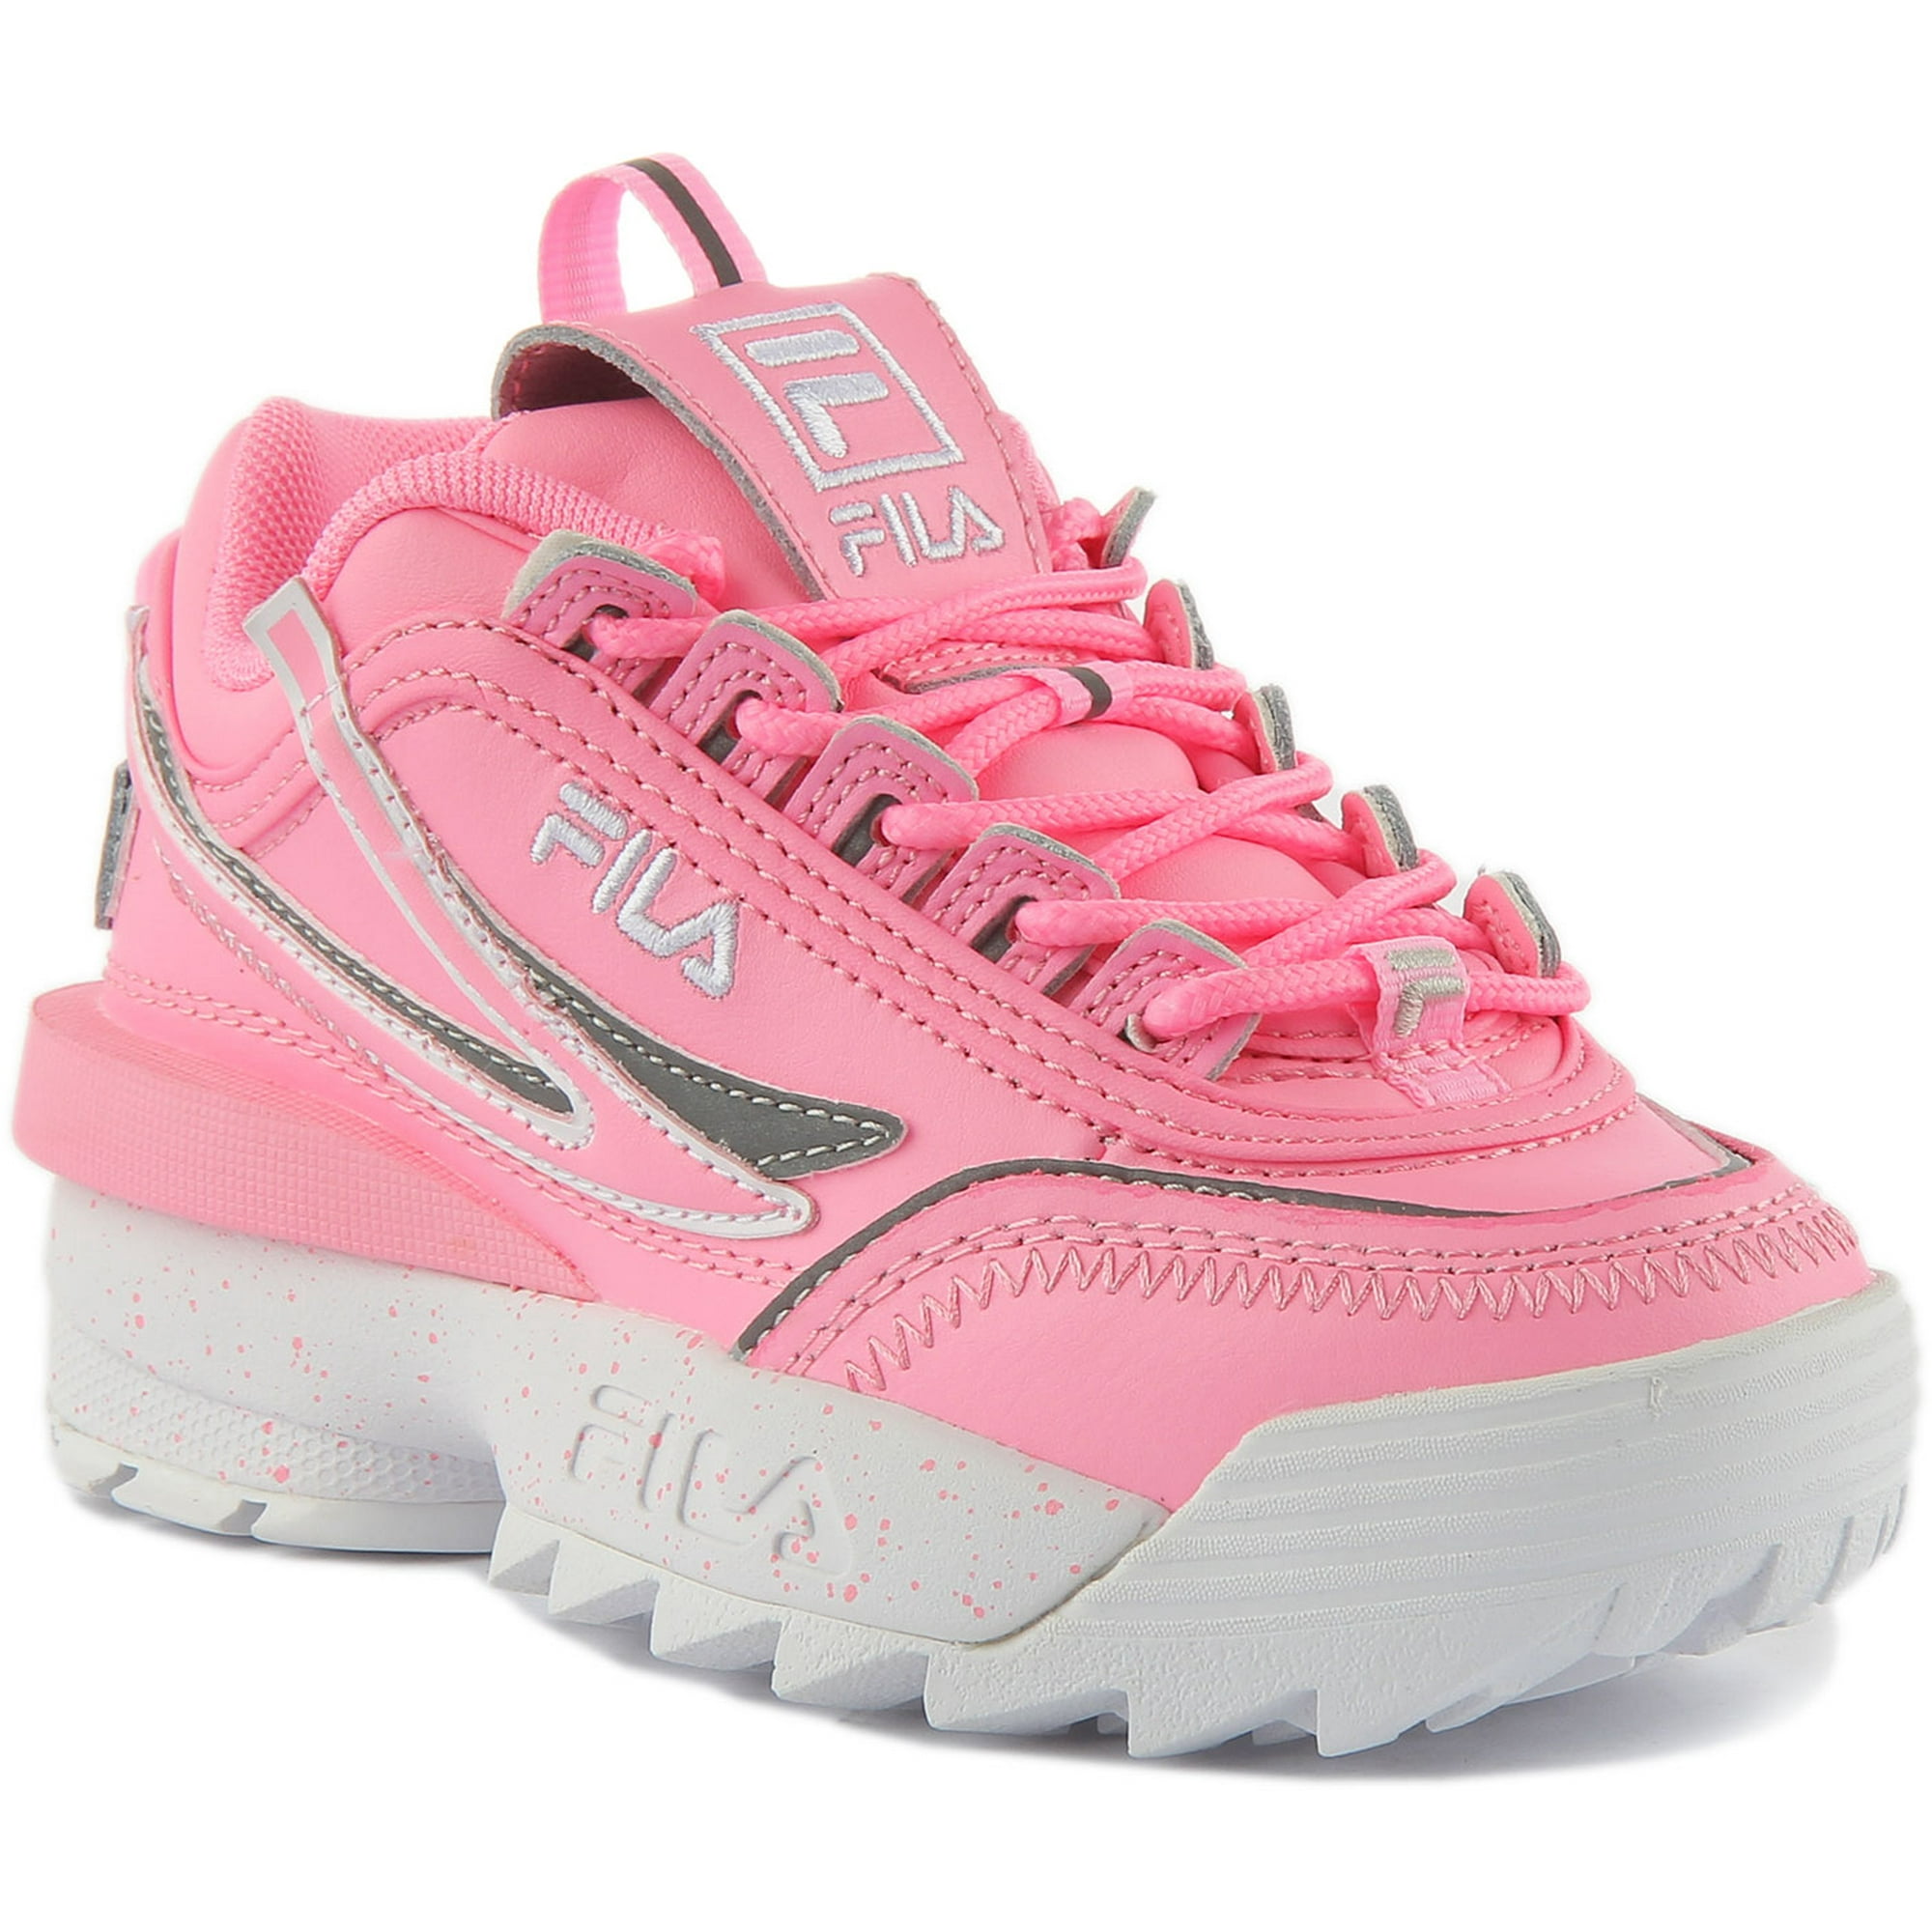 Fila Disruptor 2 EXP Kid's Lace Up Chunky Sole Casual Trainers In Size 11C - Walmart.com